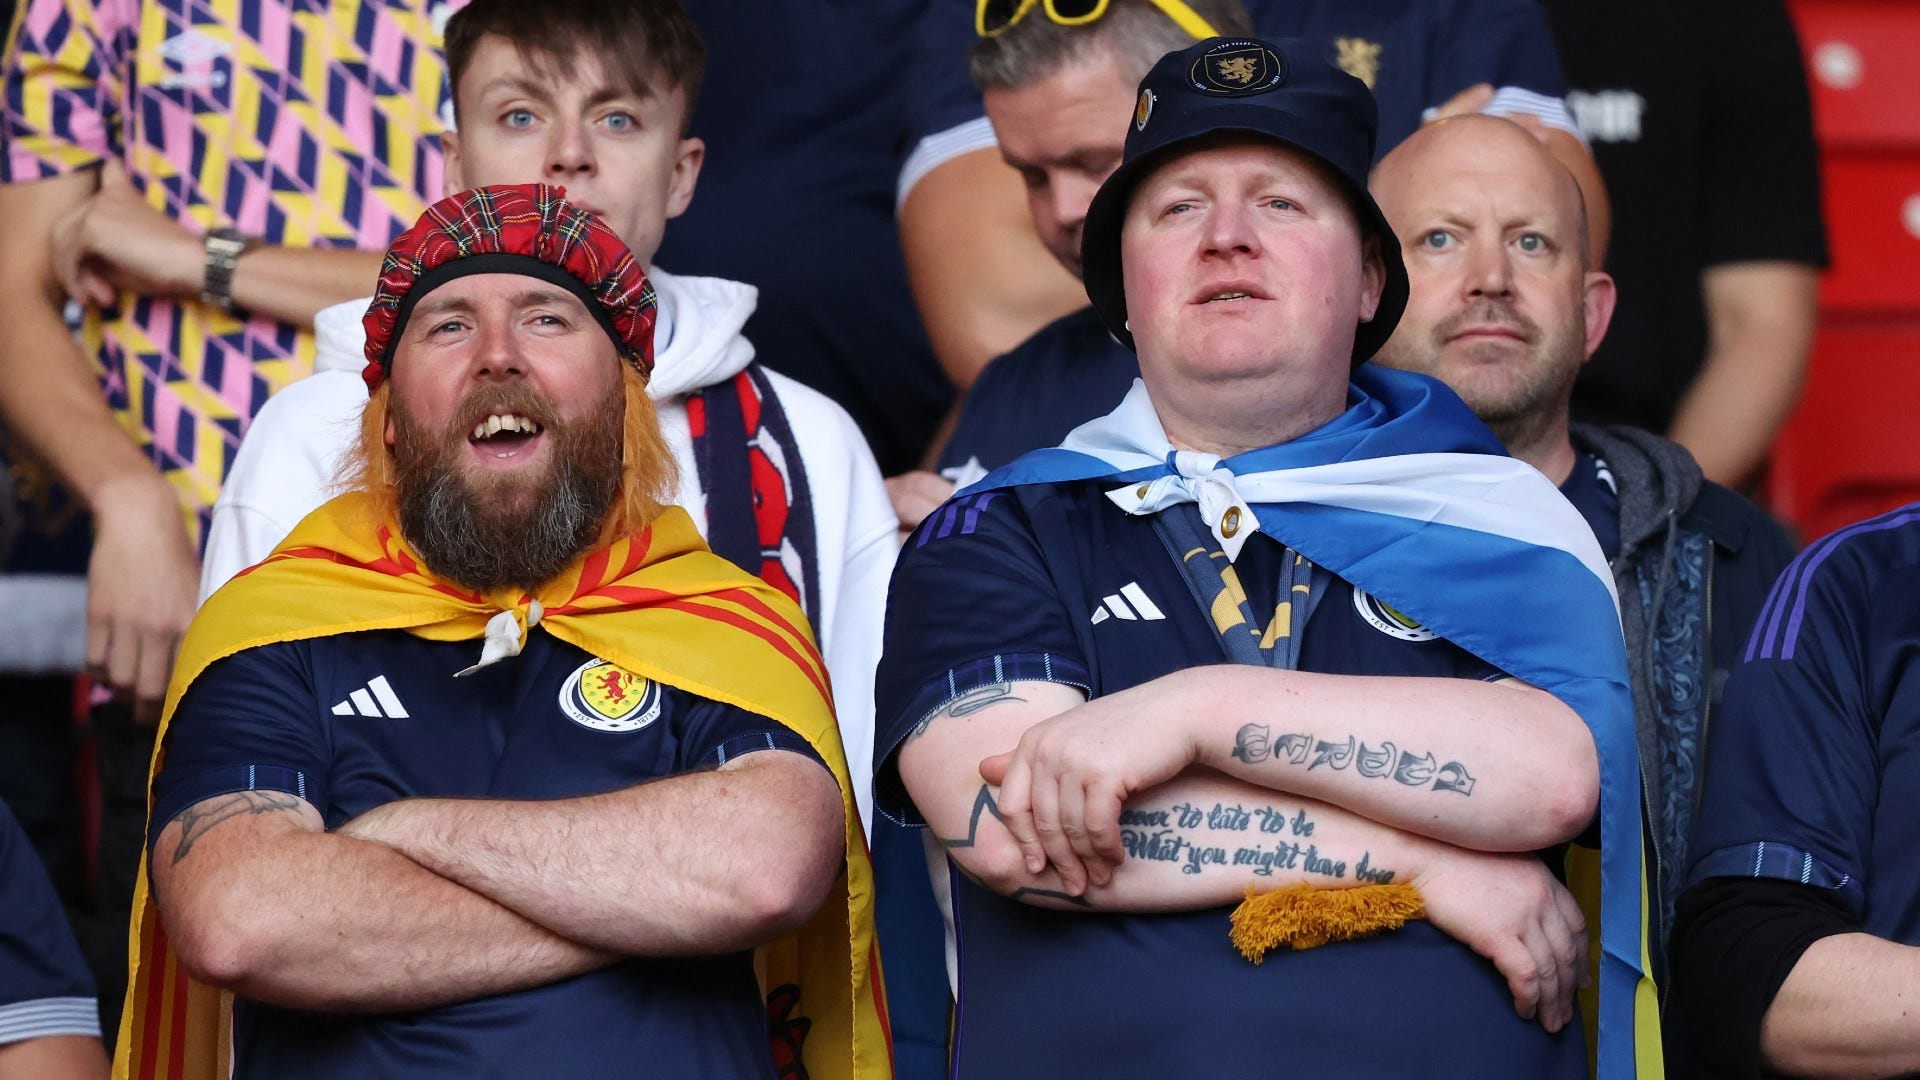 Tensions Rise at Hampden Park as Scottish Fans Boo England’s Anthem